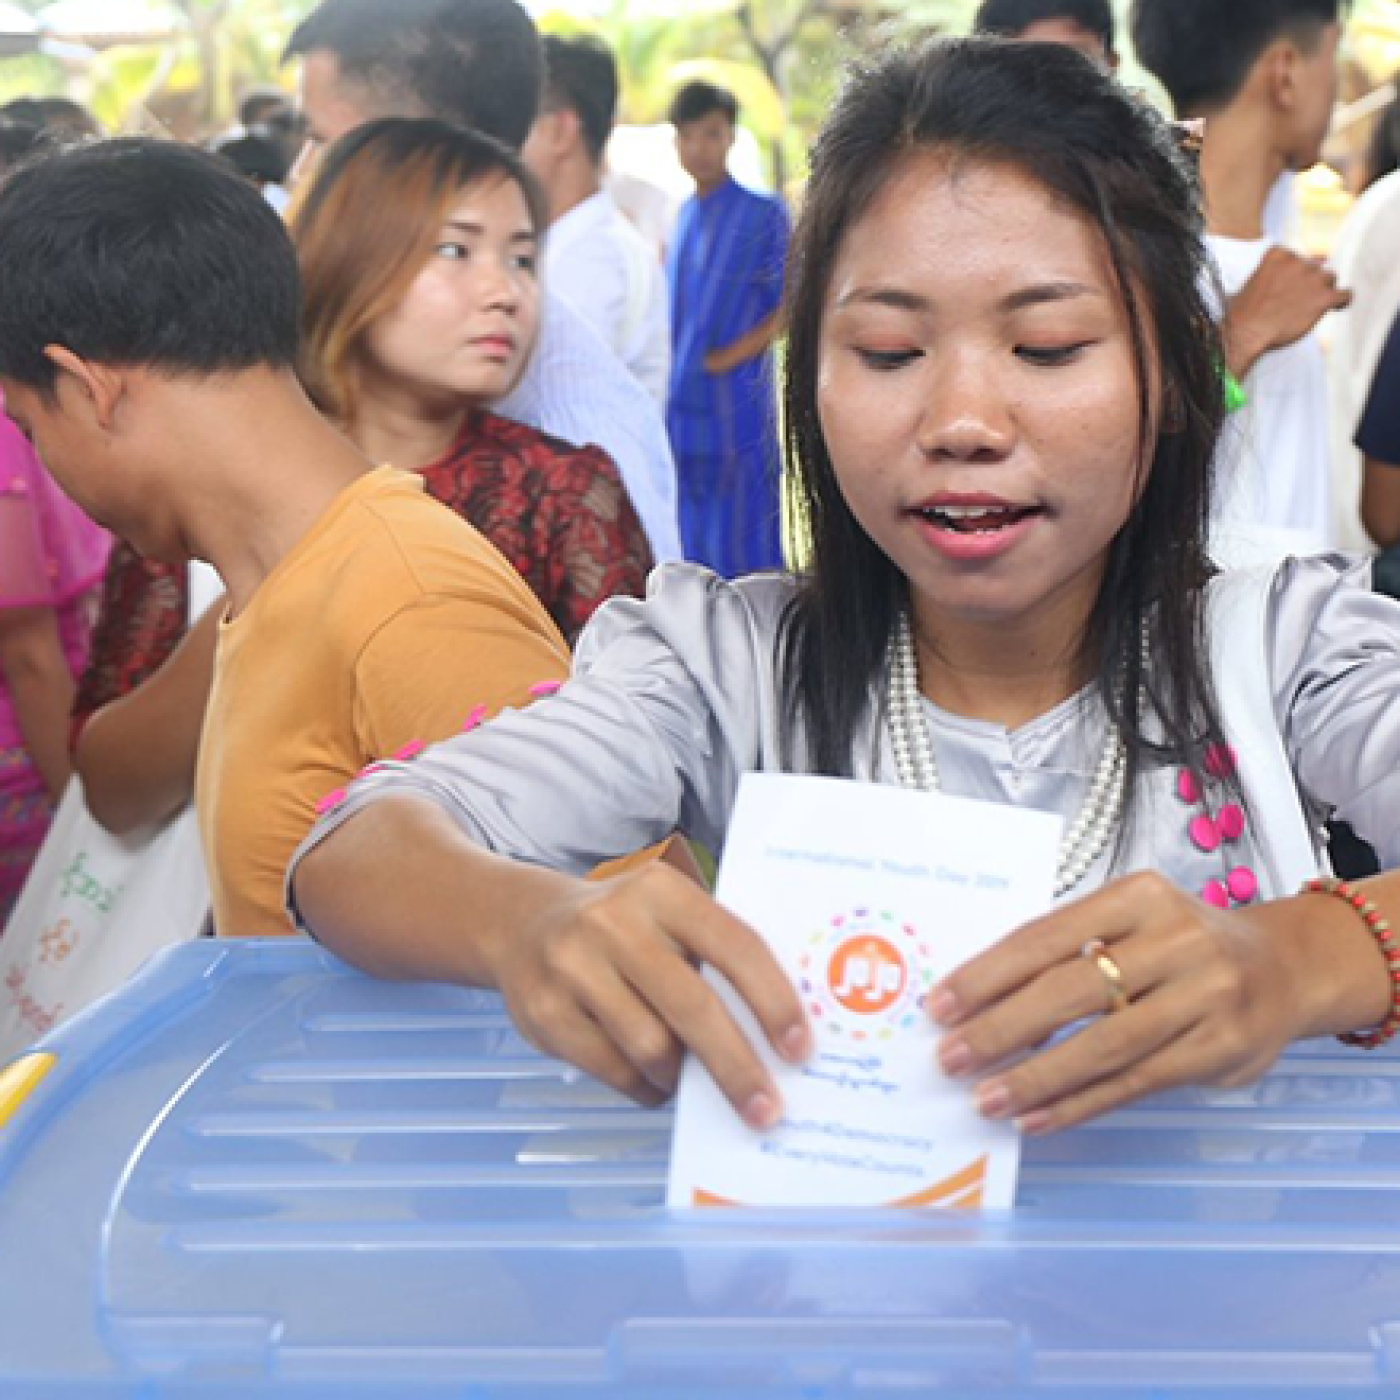 A young participant learns how to properly cast a ballot at the UEC mock polling station.